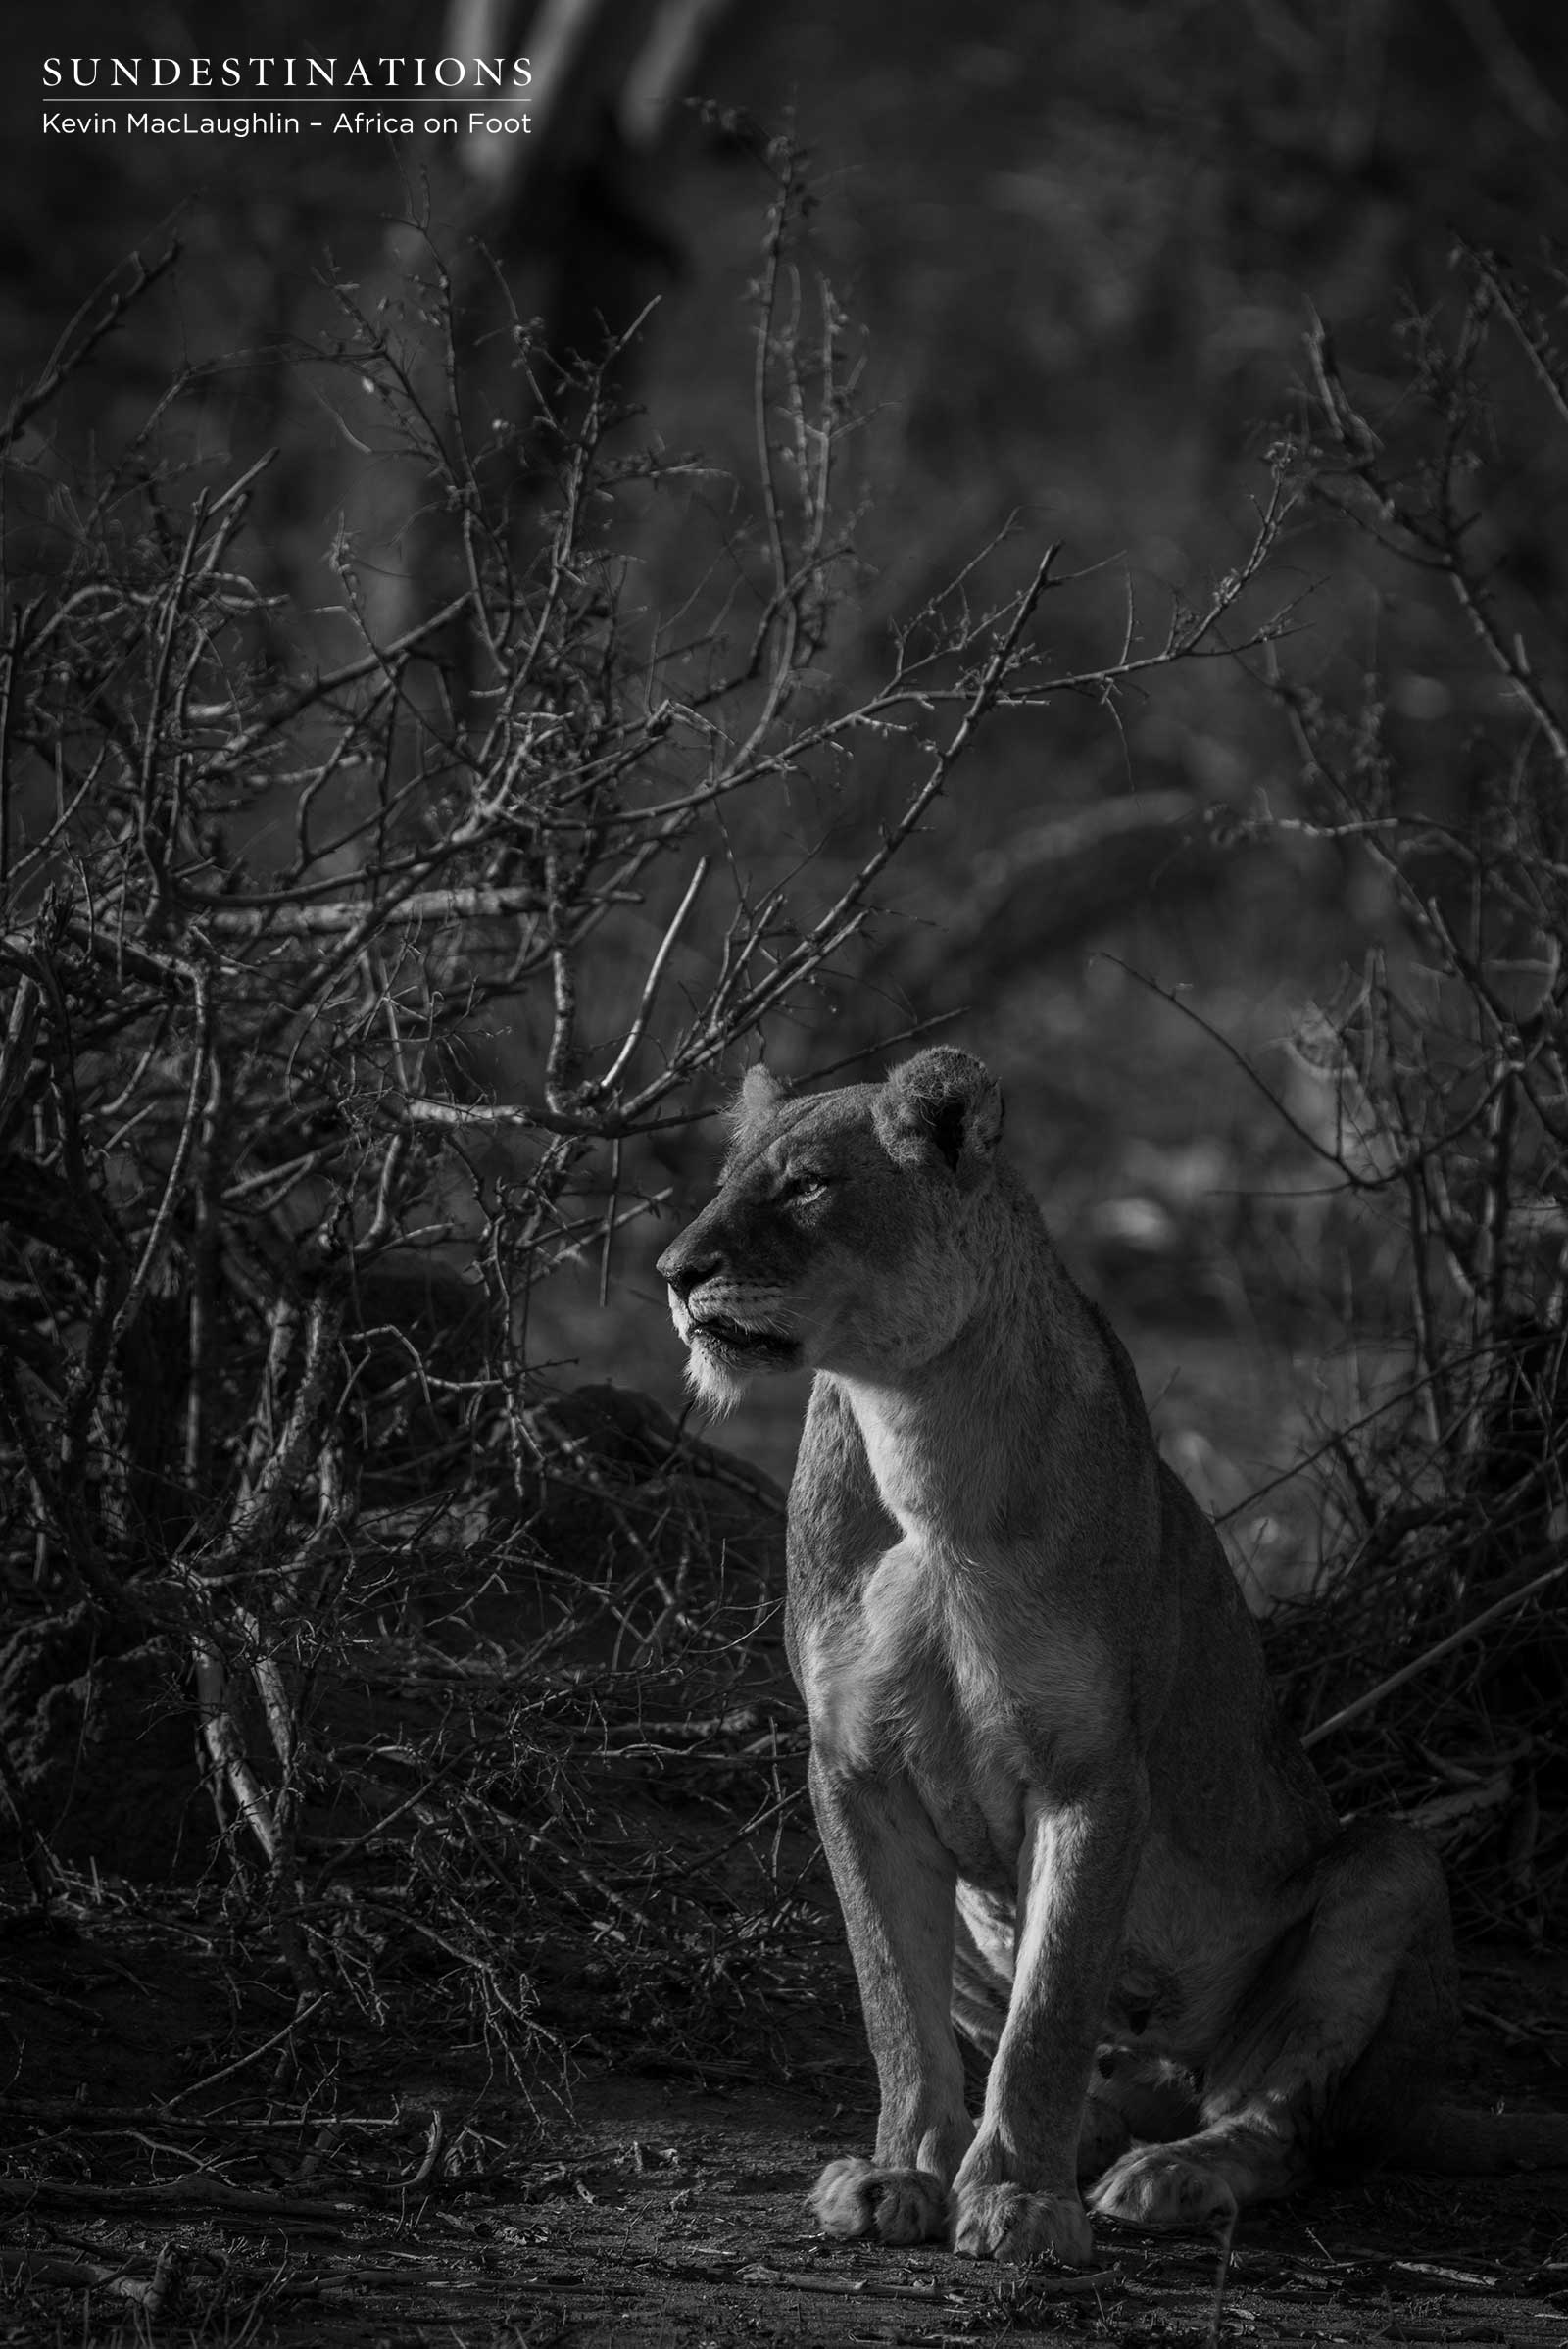 Ross Lioness Africa on Foot